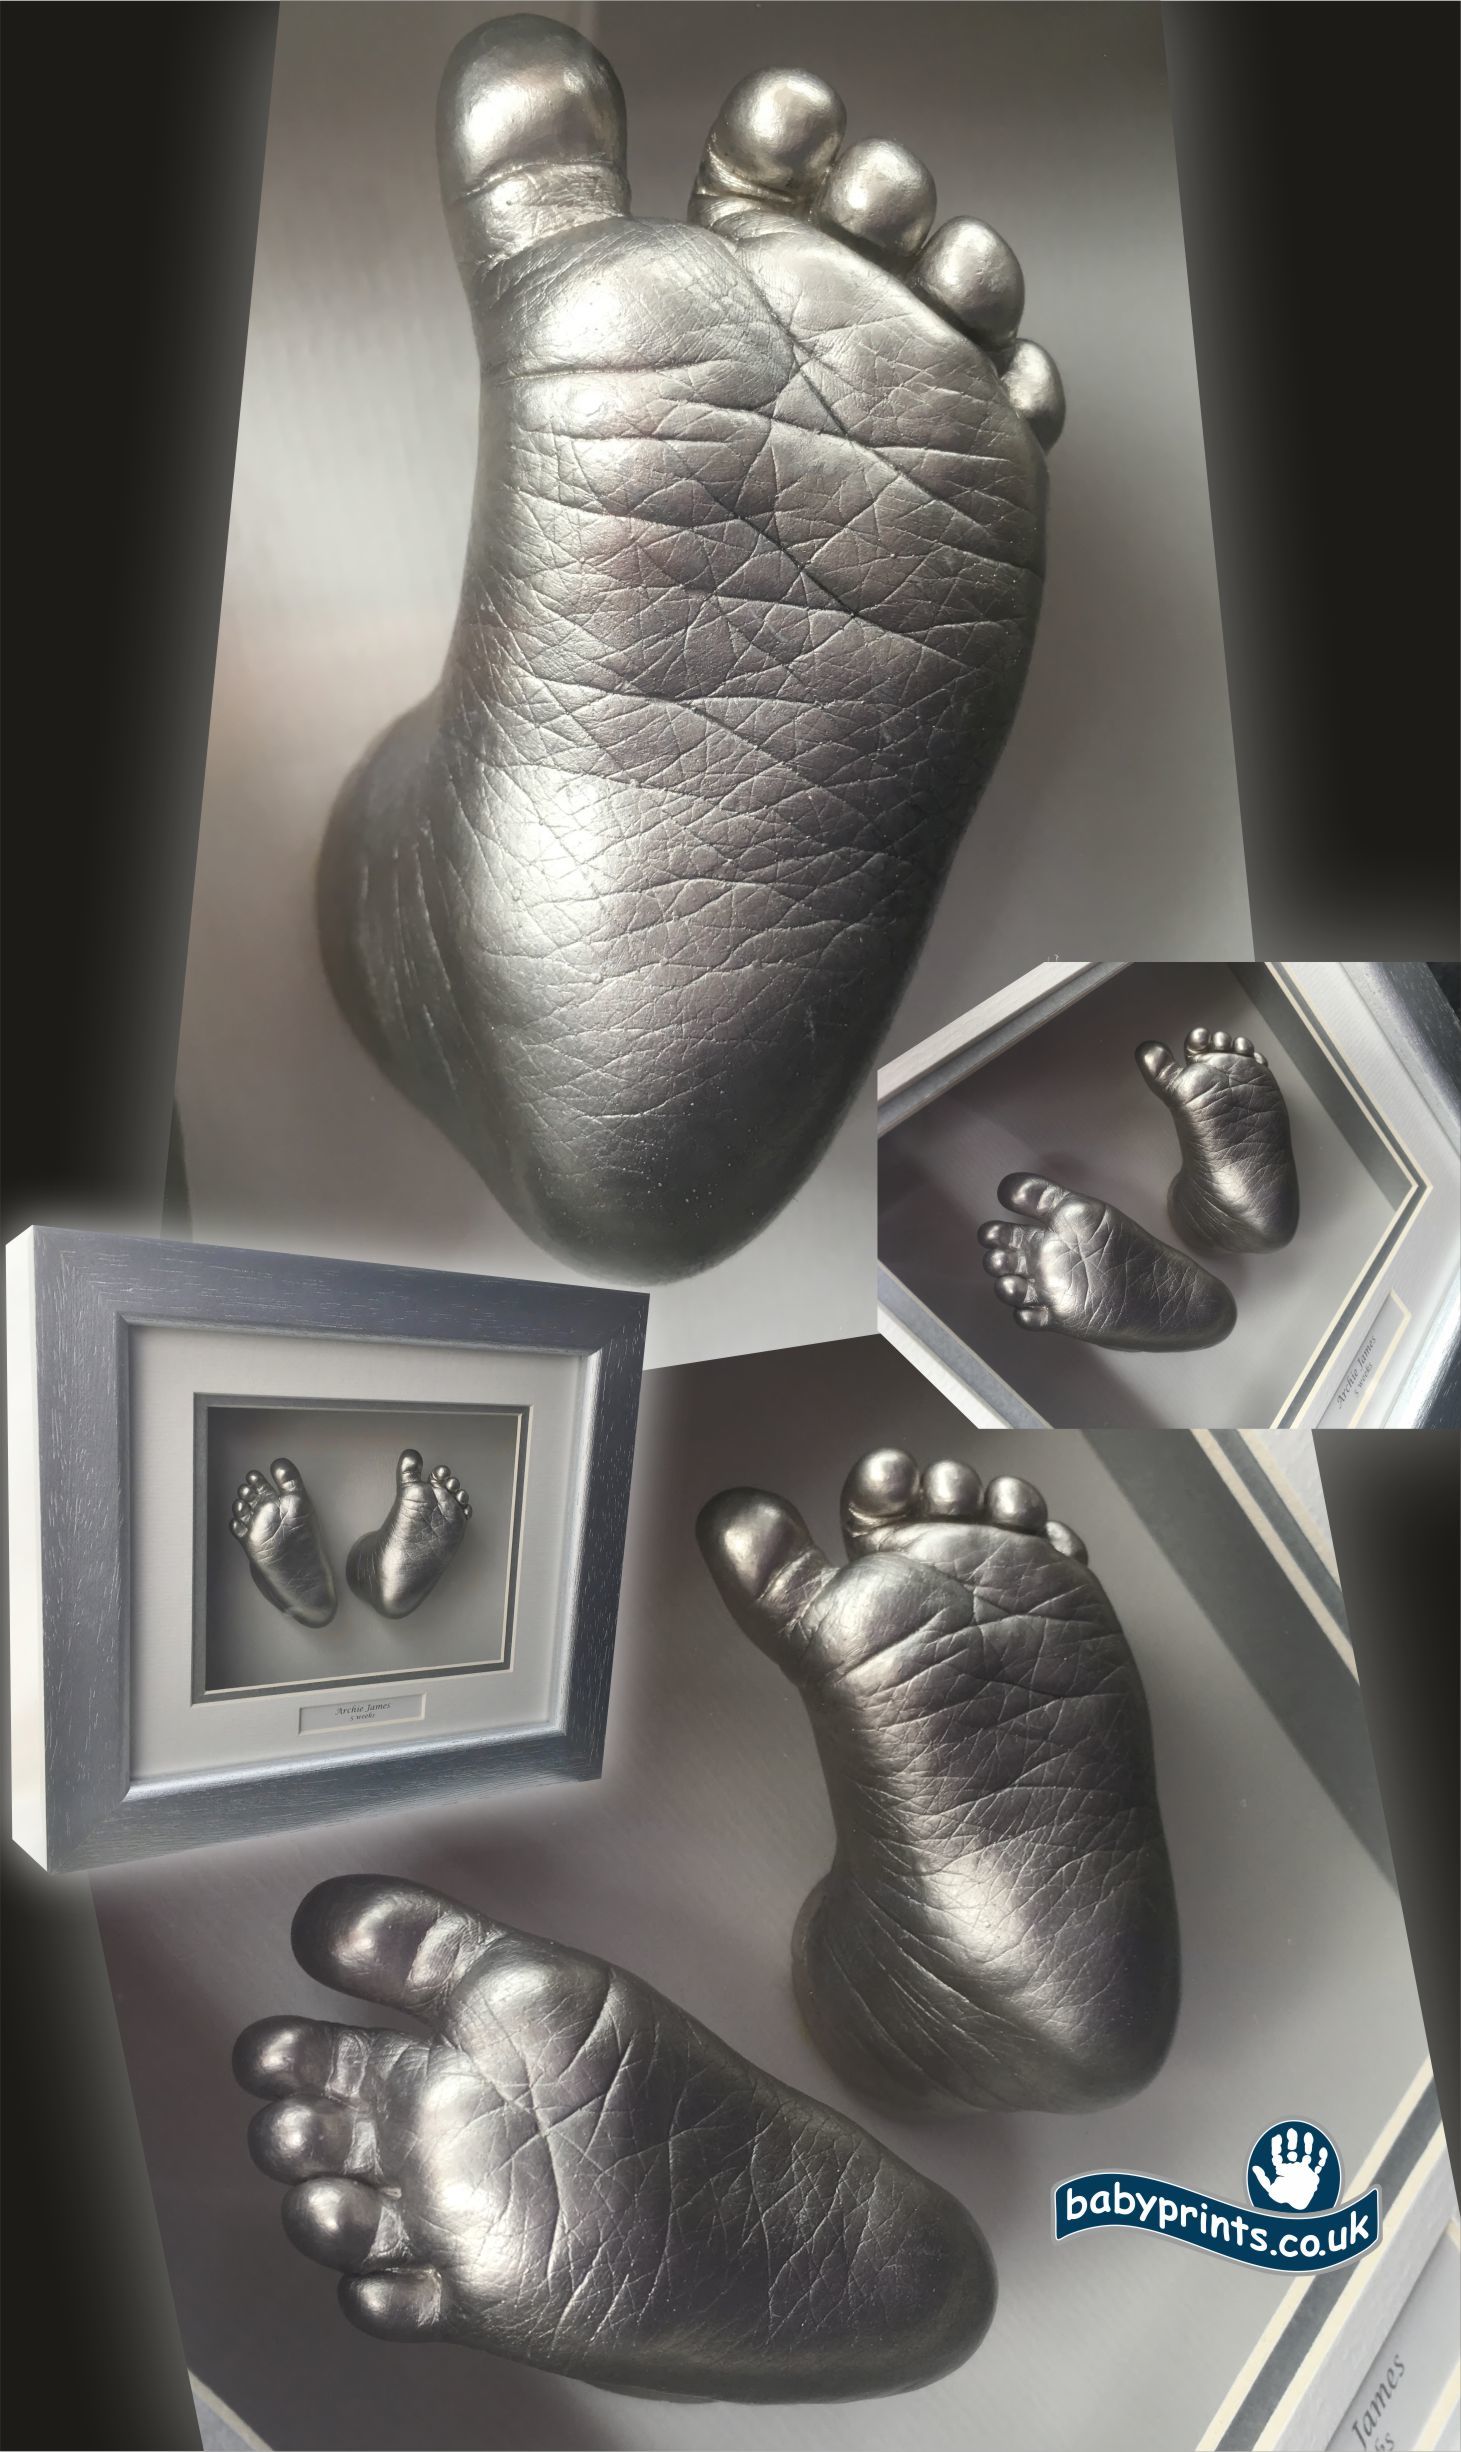 Capture all the detail of your baby’s feet